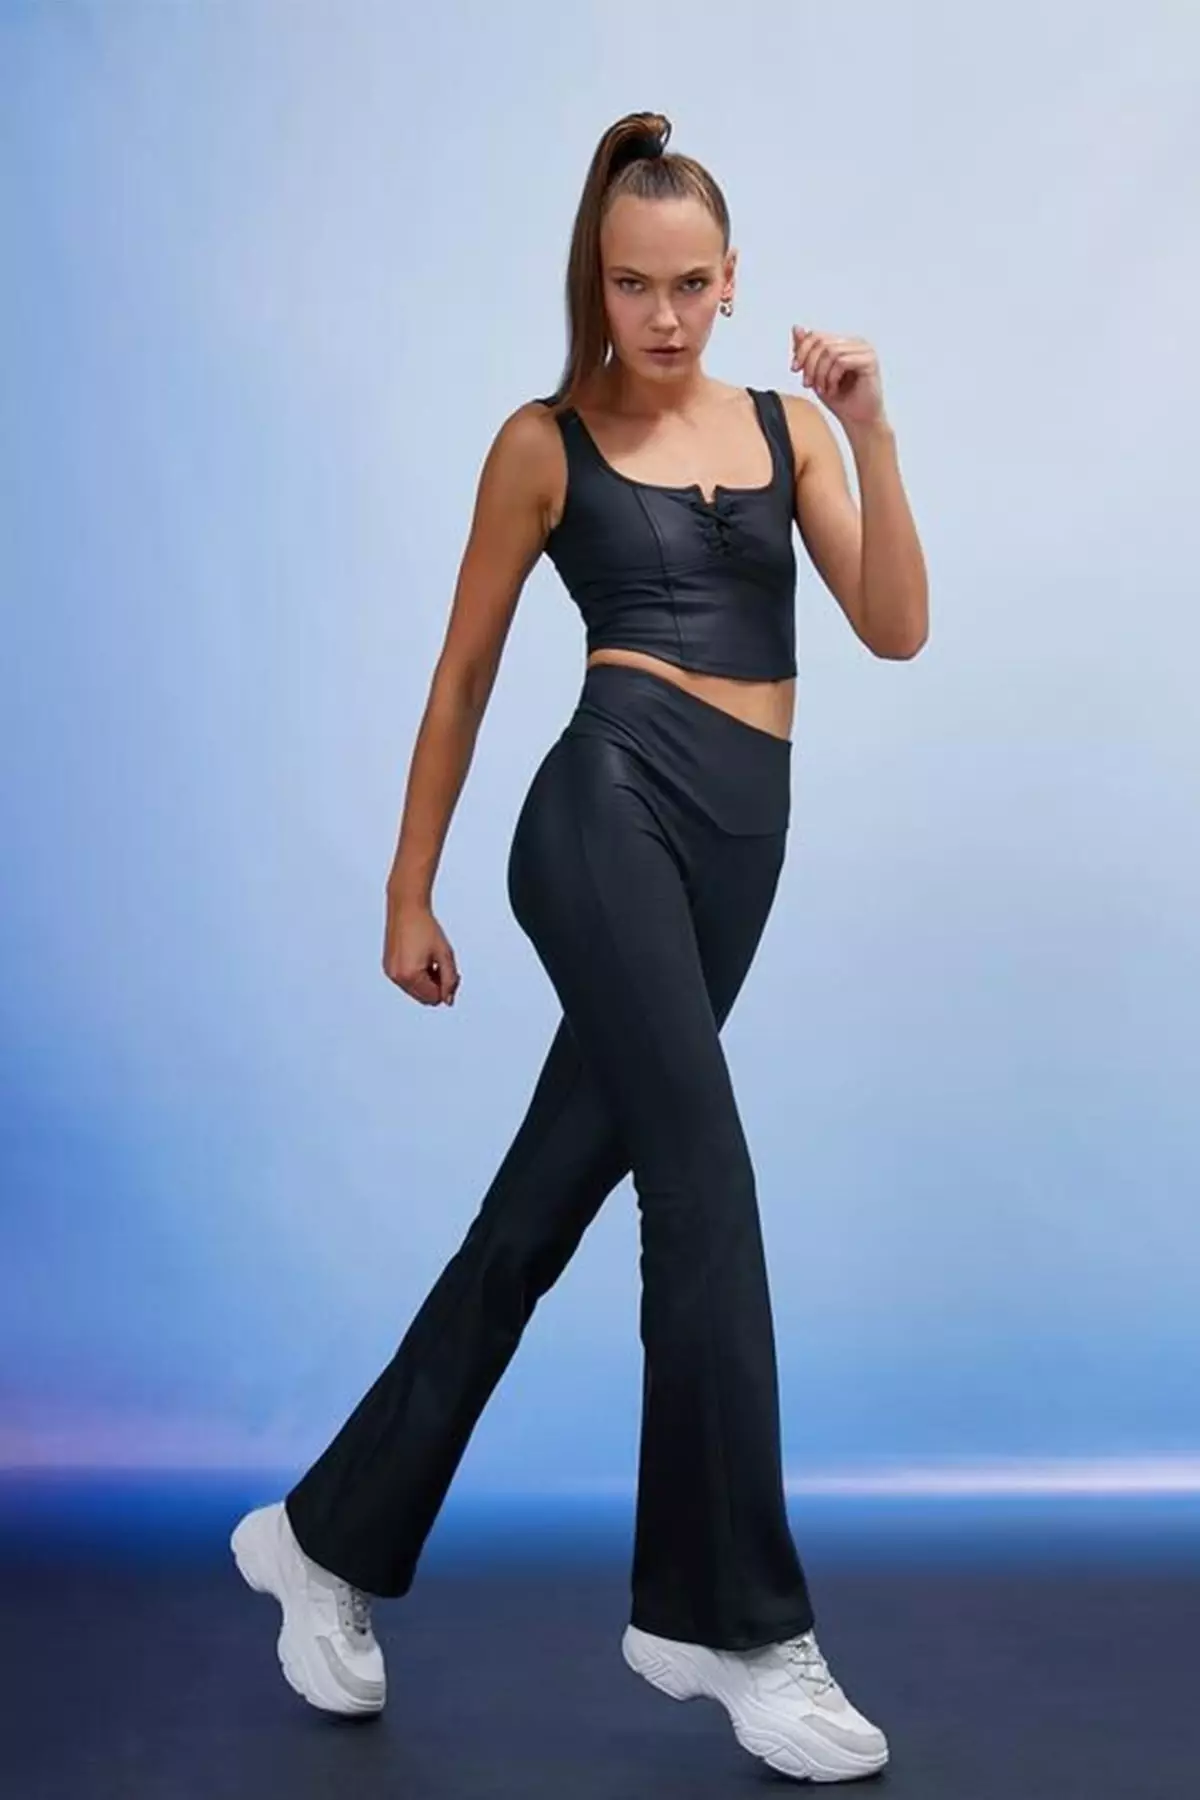 Lotus No Chafe 3/4 Leggings by Lorna Jane Online, THE ICONIC